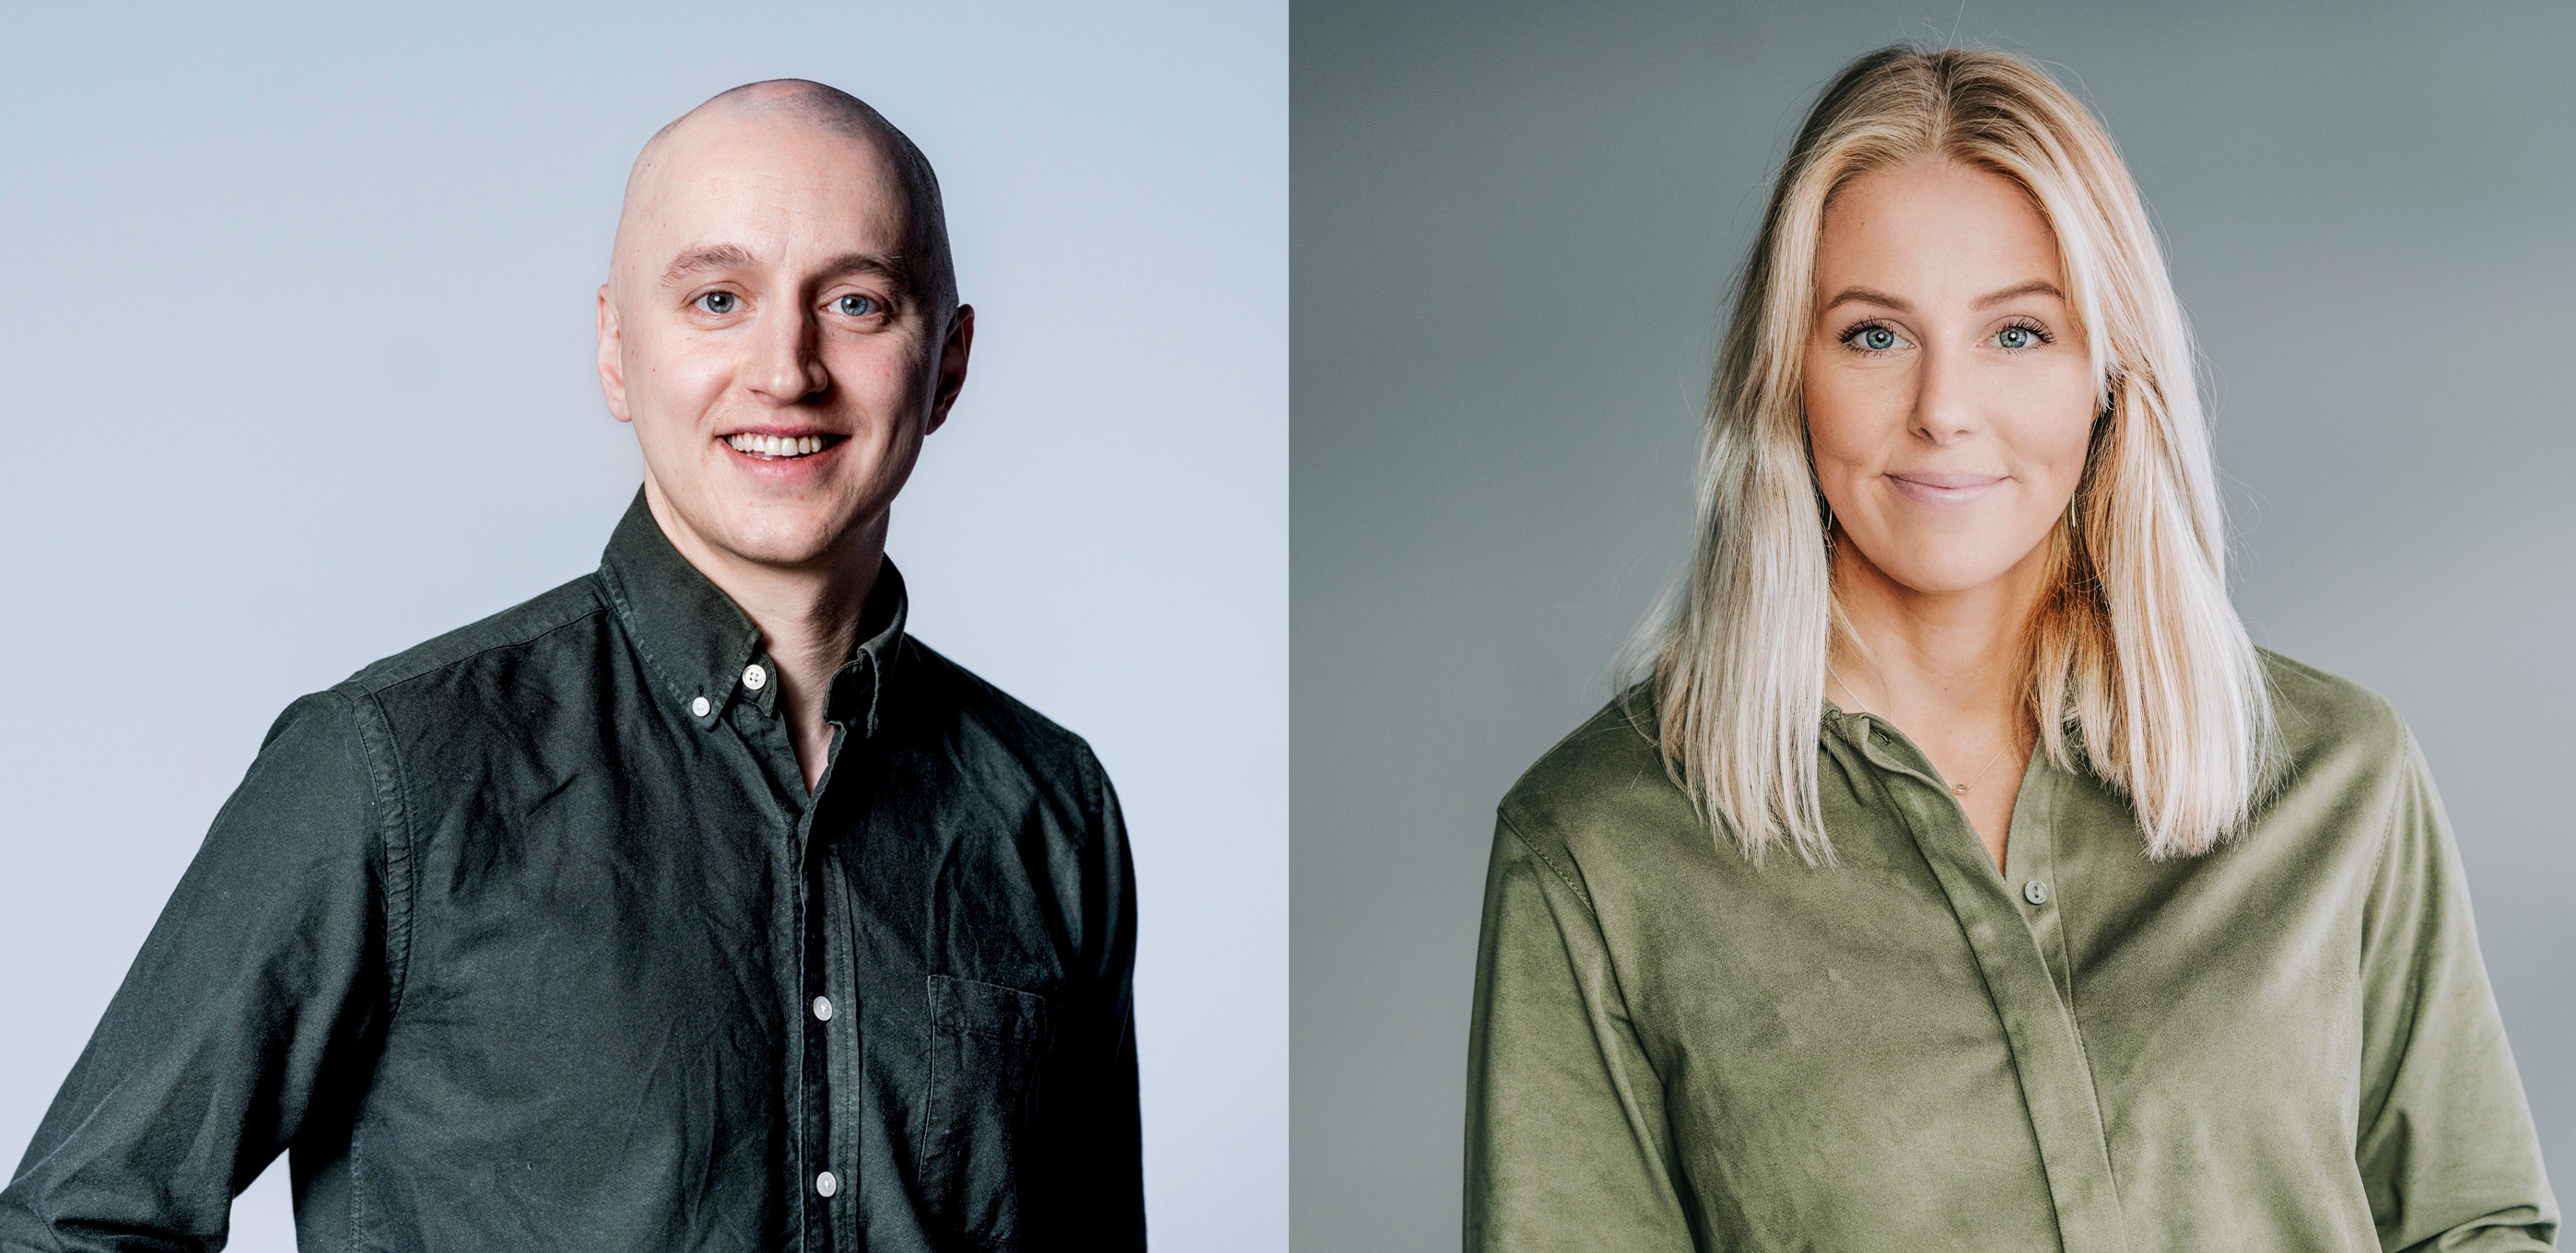 Martin Sandström will take over the role of Chief of Staff and Louise Ekman Chief Communication Officer